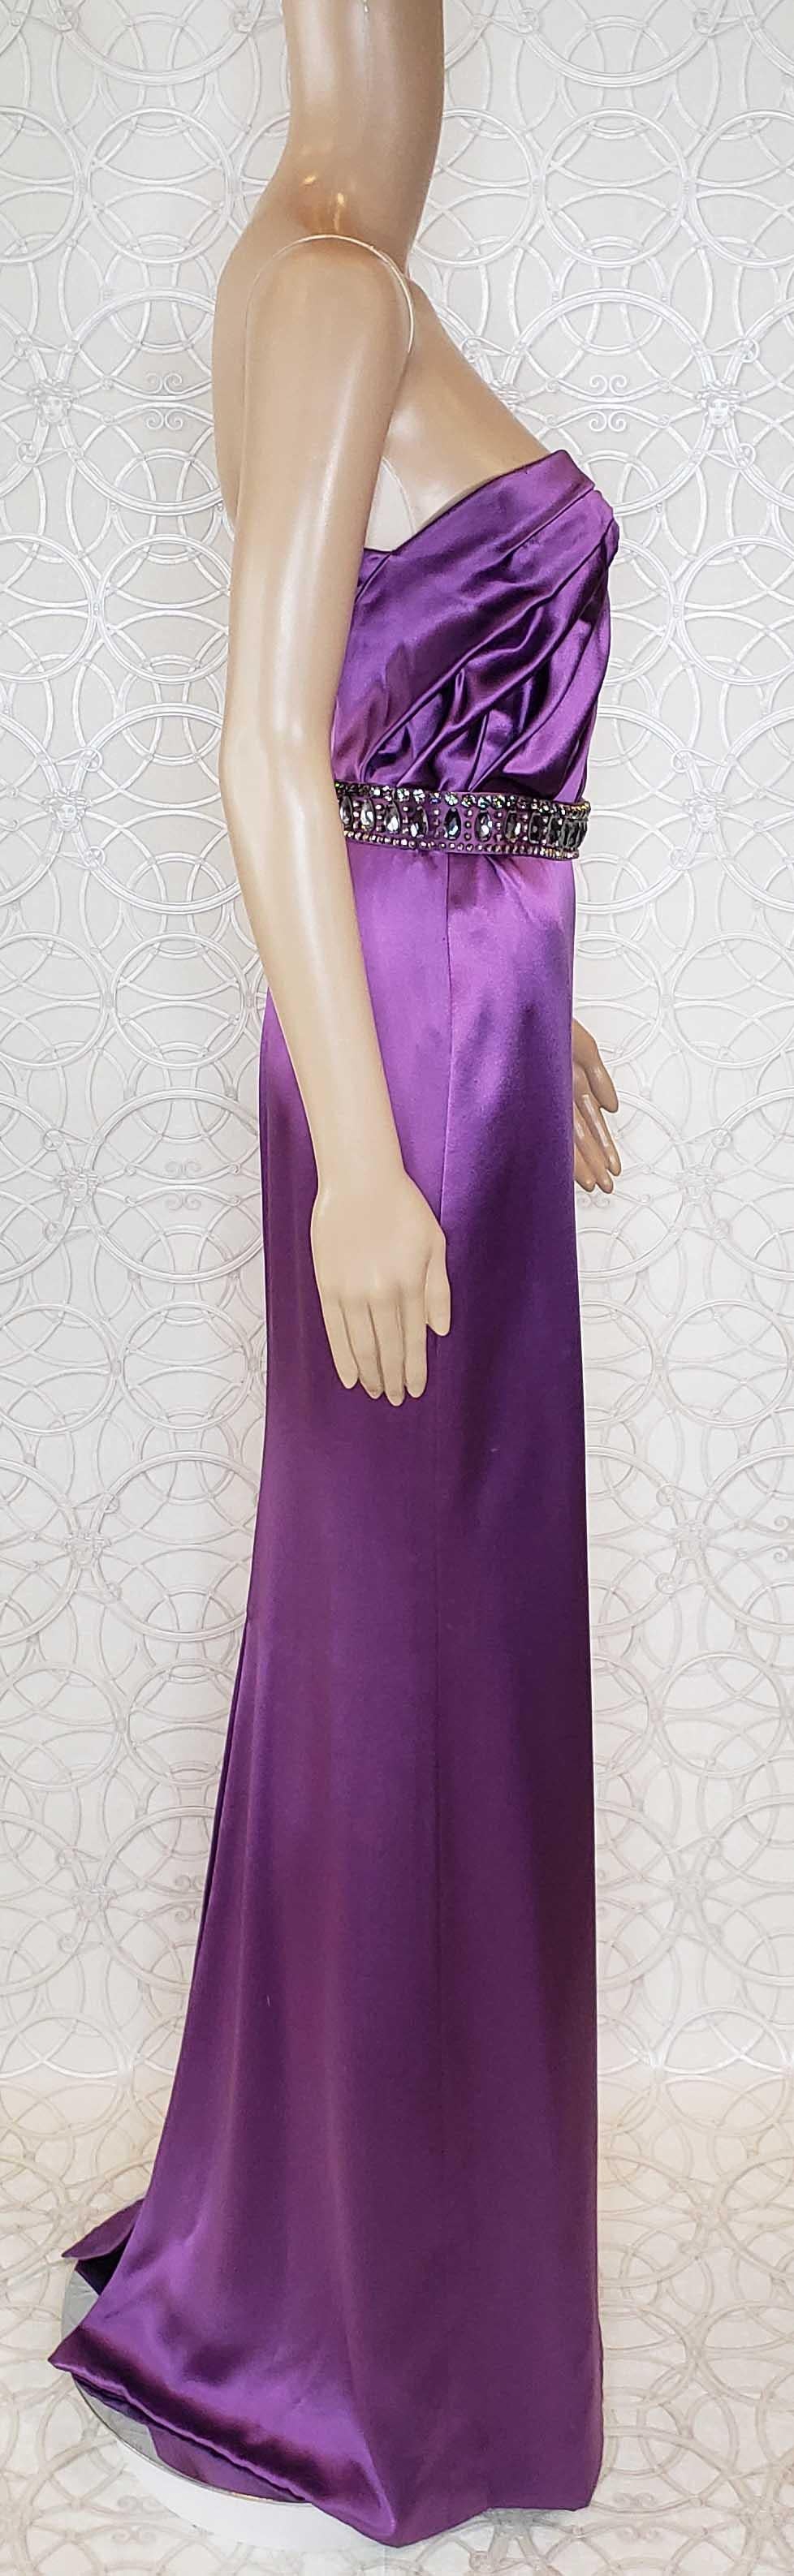 NEW VERSACE EMBELLISHED AMETHYST STRAPLESS GOWN DRESS EVA WORE IN Paris! 38 - 2 For Sale 2